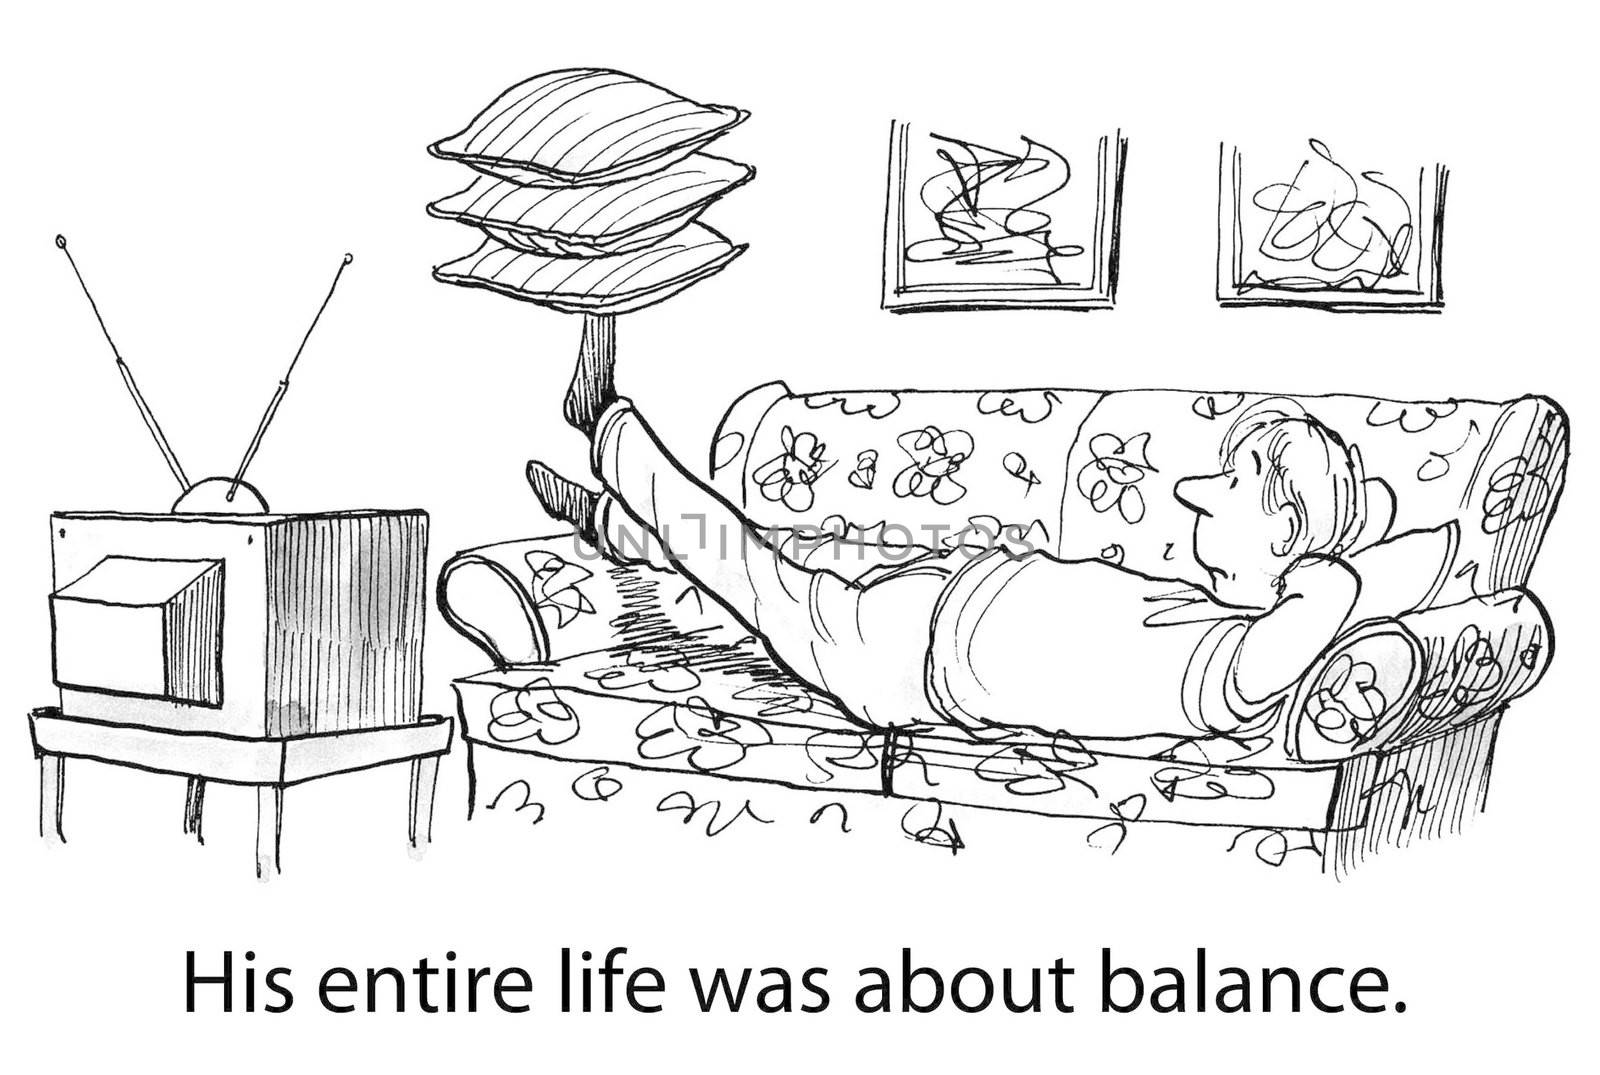 His entire life was about balance.